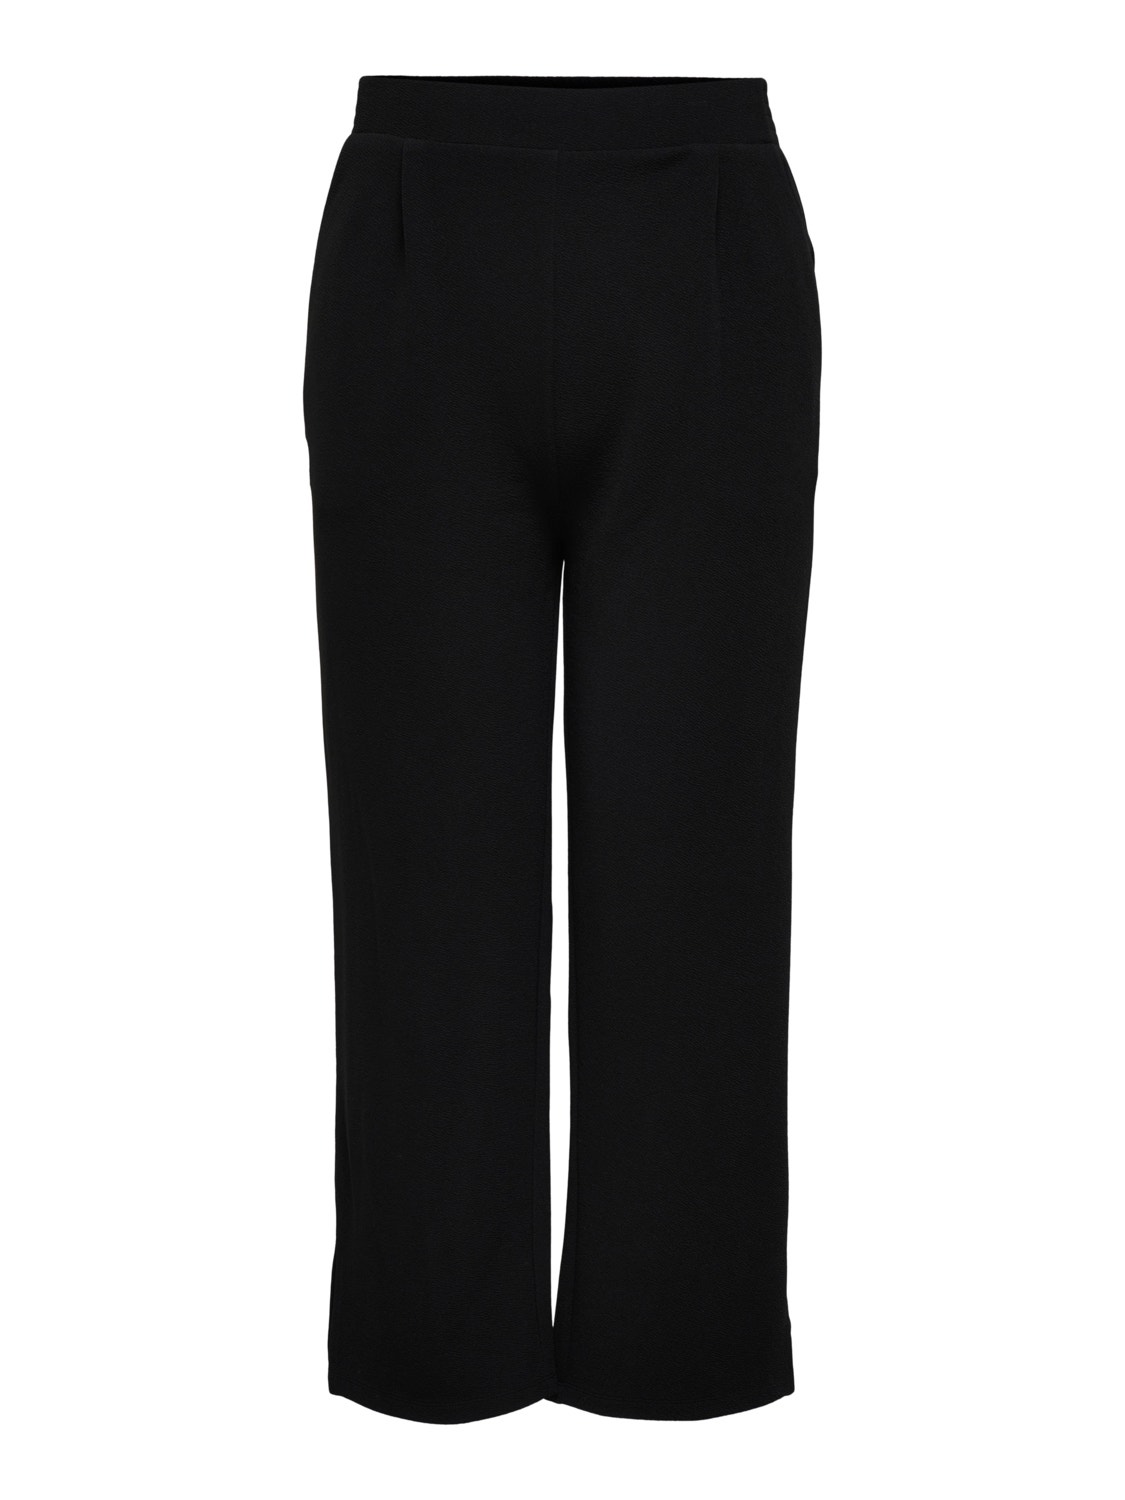 ONLY Regular Fit Trousers -Black - 15247324